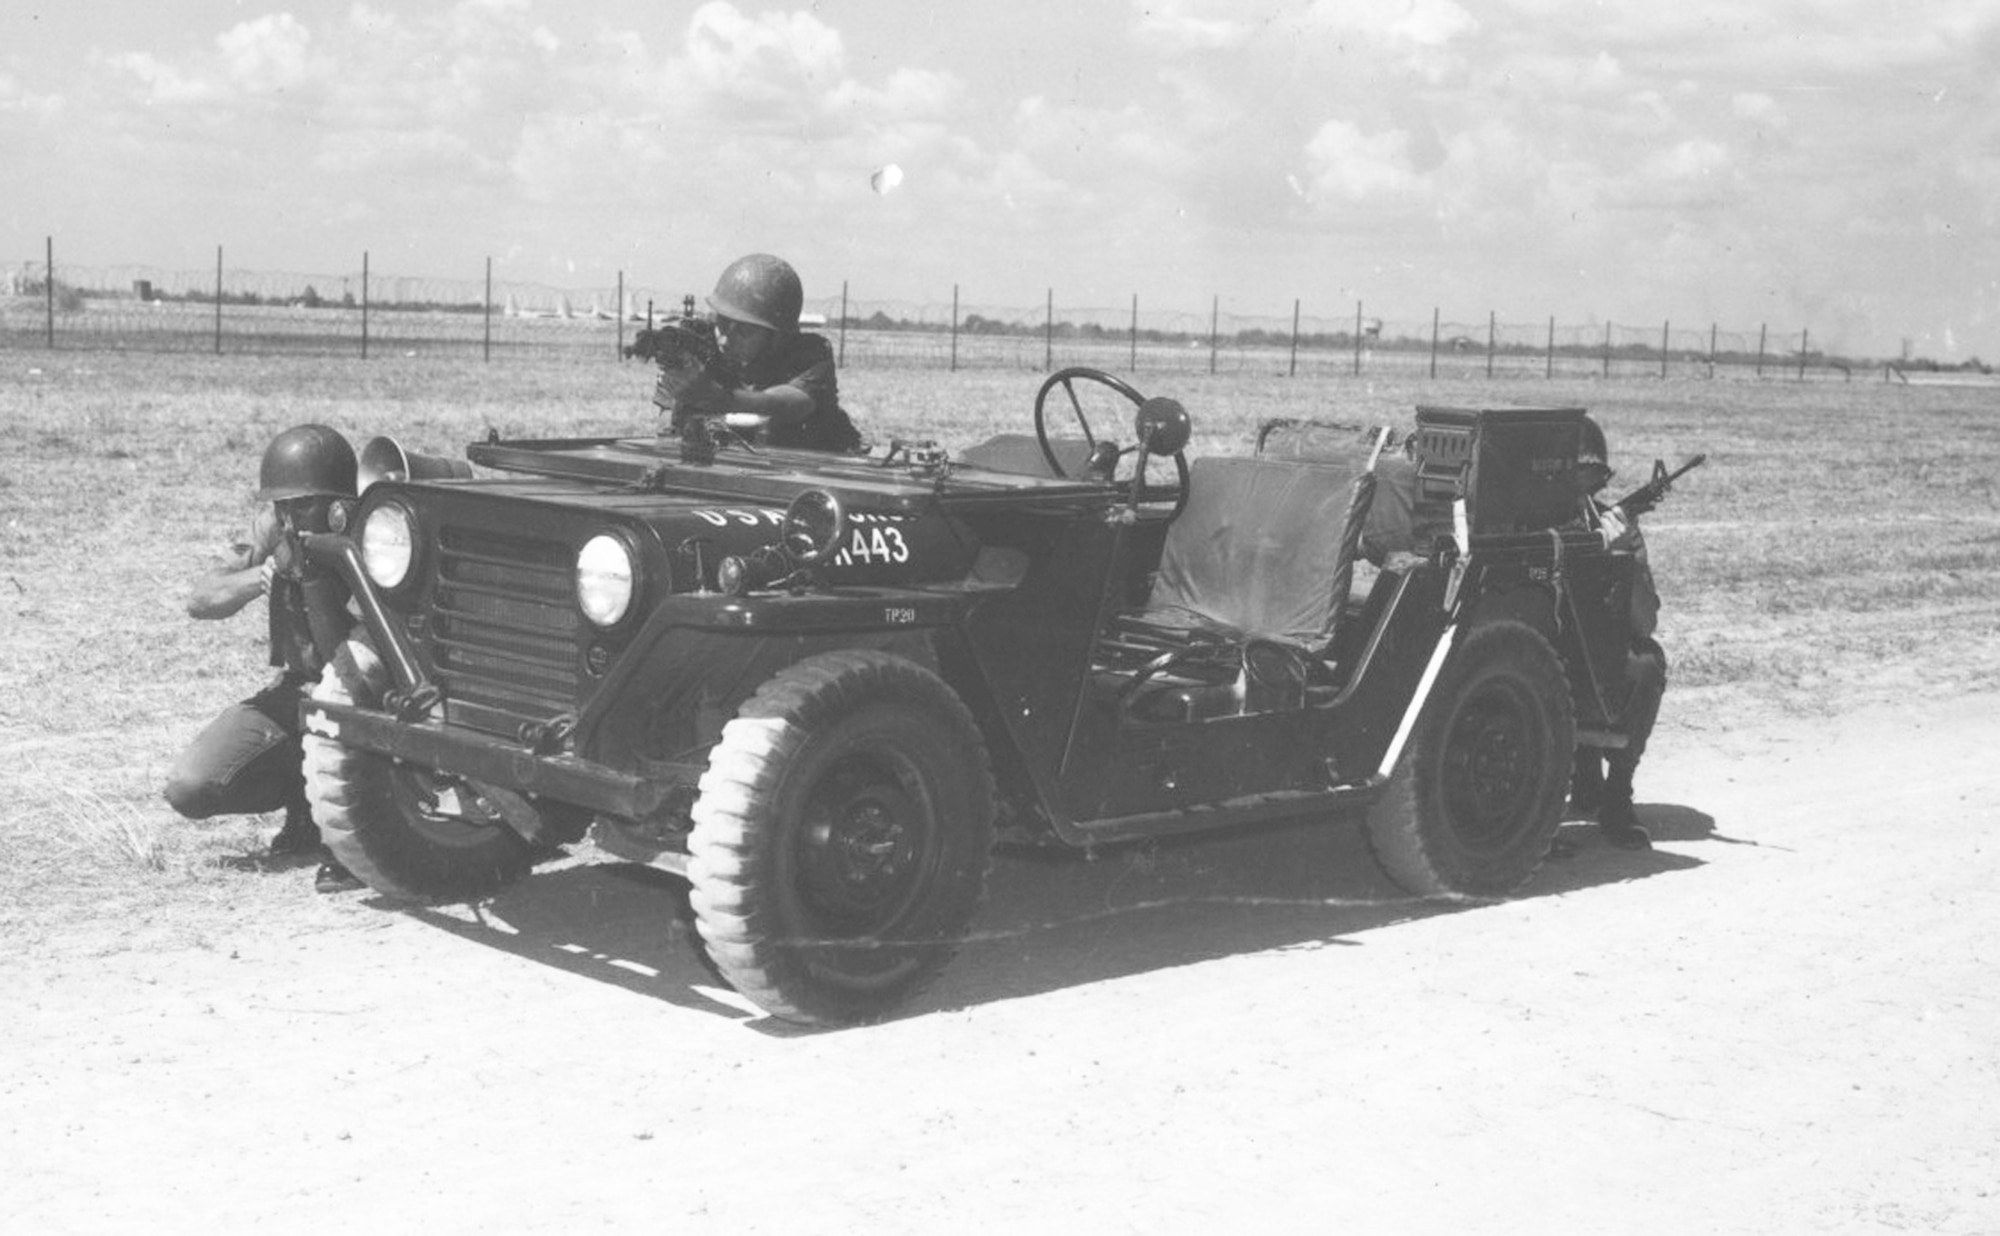 Jeep-based Sabotage Alert Team (SAT) at Tan Son Nhut in the mid-1960s. These mobile teams moved quickly in response to enemy attacks. They were later renamed Security Alert Teams. (Image courtesy of the Security Forces Museum).